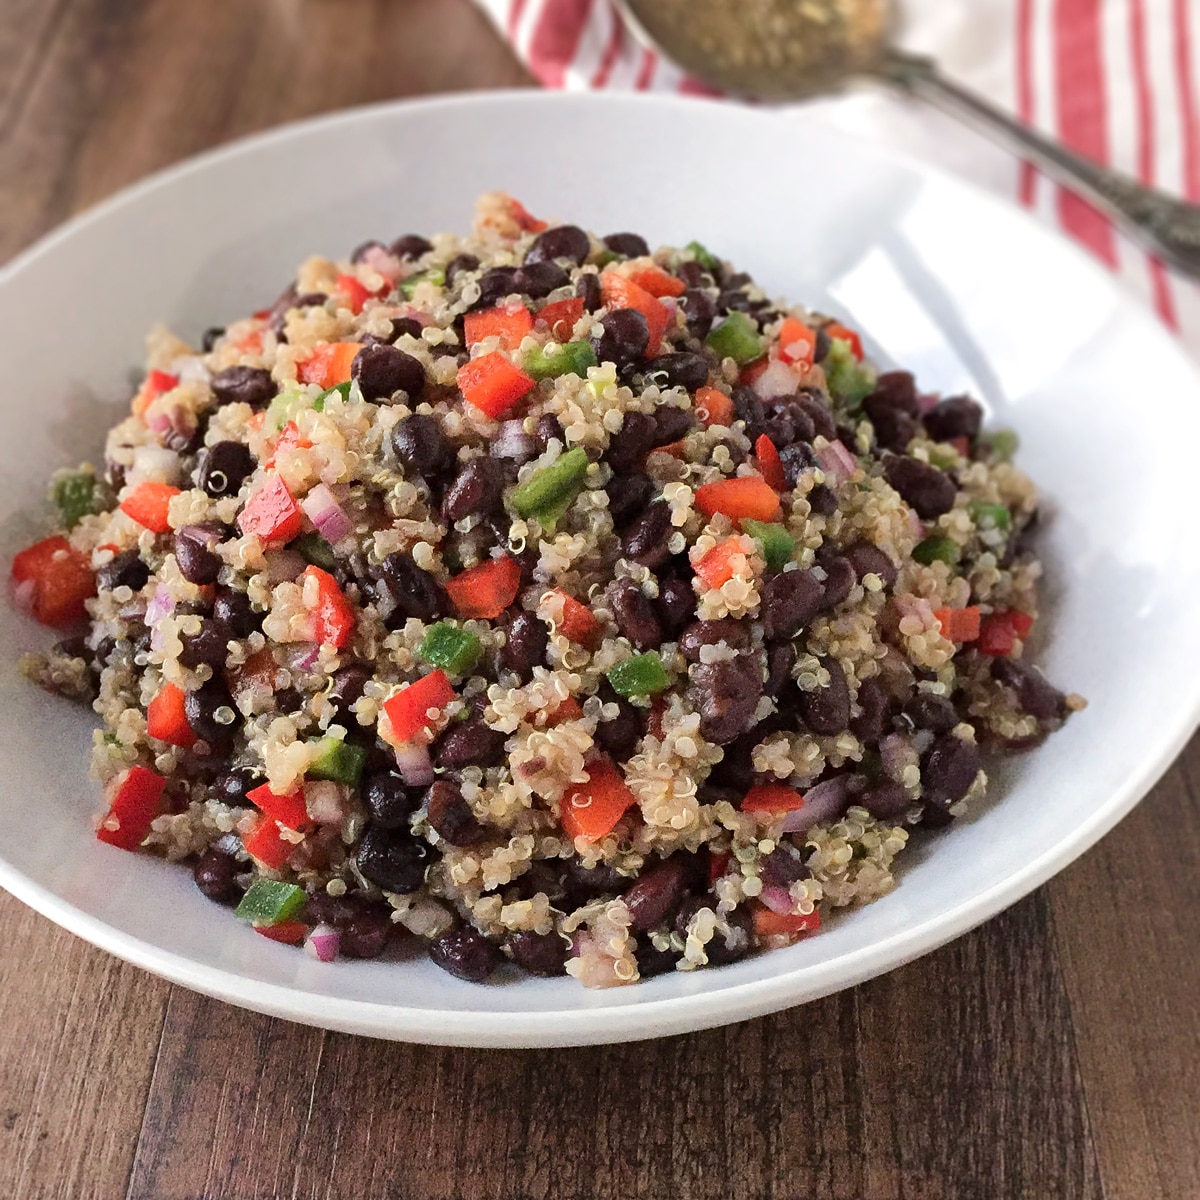 Spicy Quinoa and Black Bean Salad - Healthier Dishes